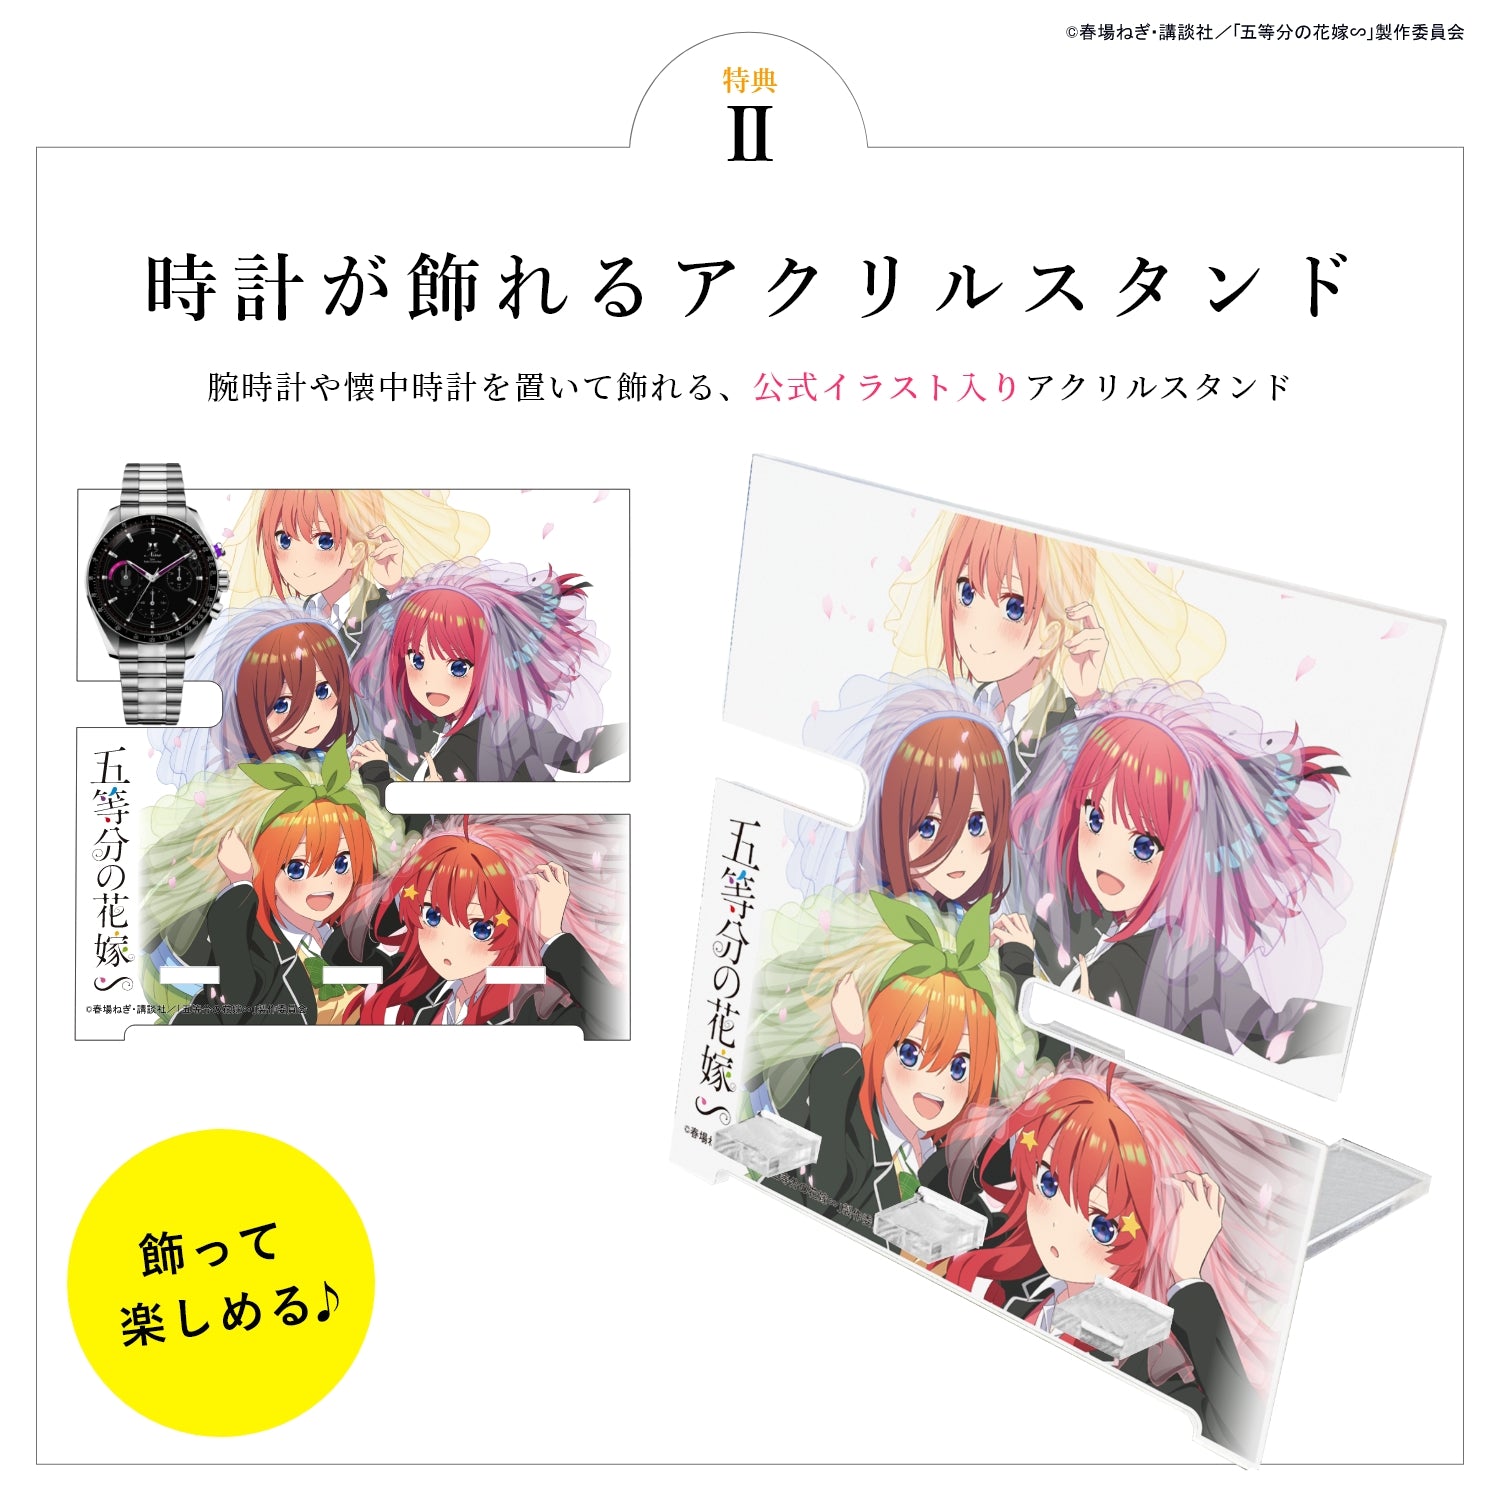 TV SPECIAL ANIME“THE QUINTESSENTIAL QUINTUPLETS” RADIO CHRONOGRAPH WATCHES| NINO NAKANO